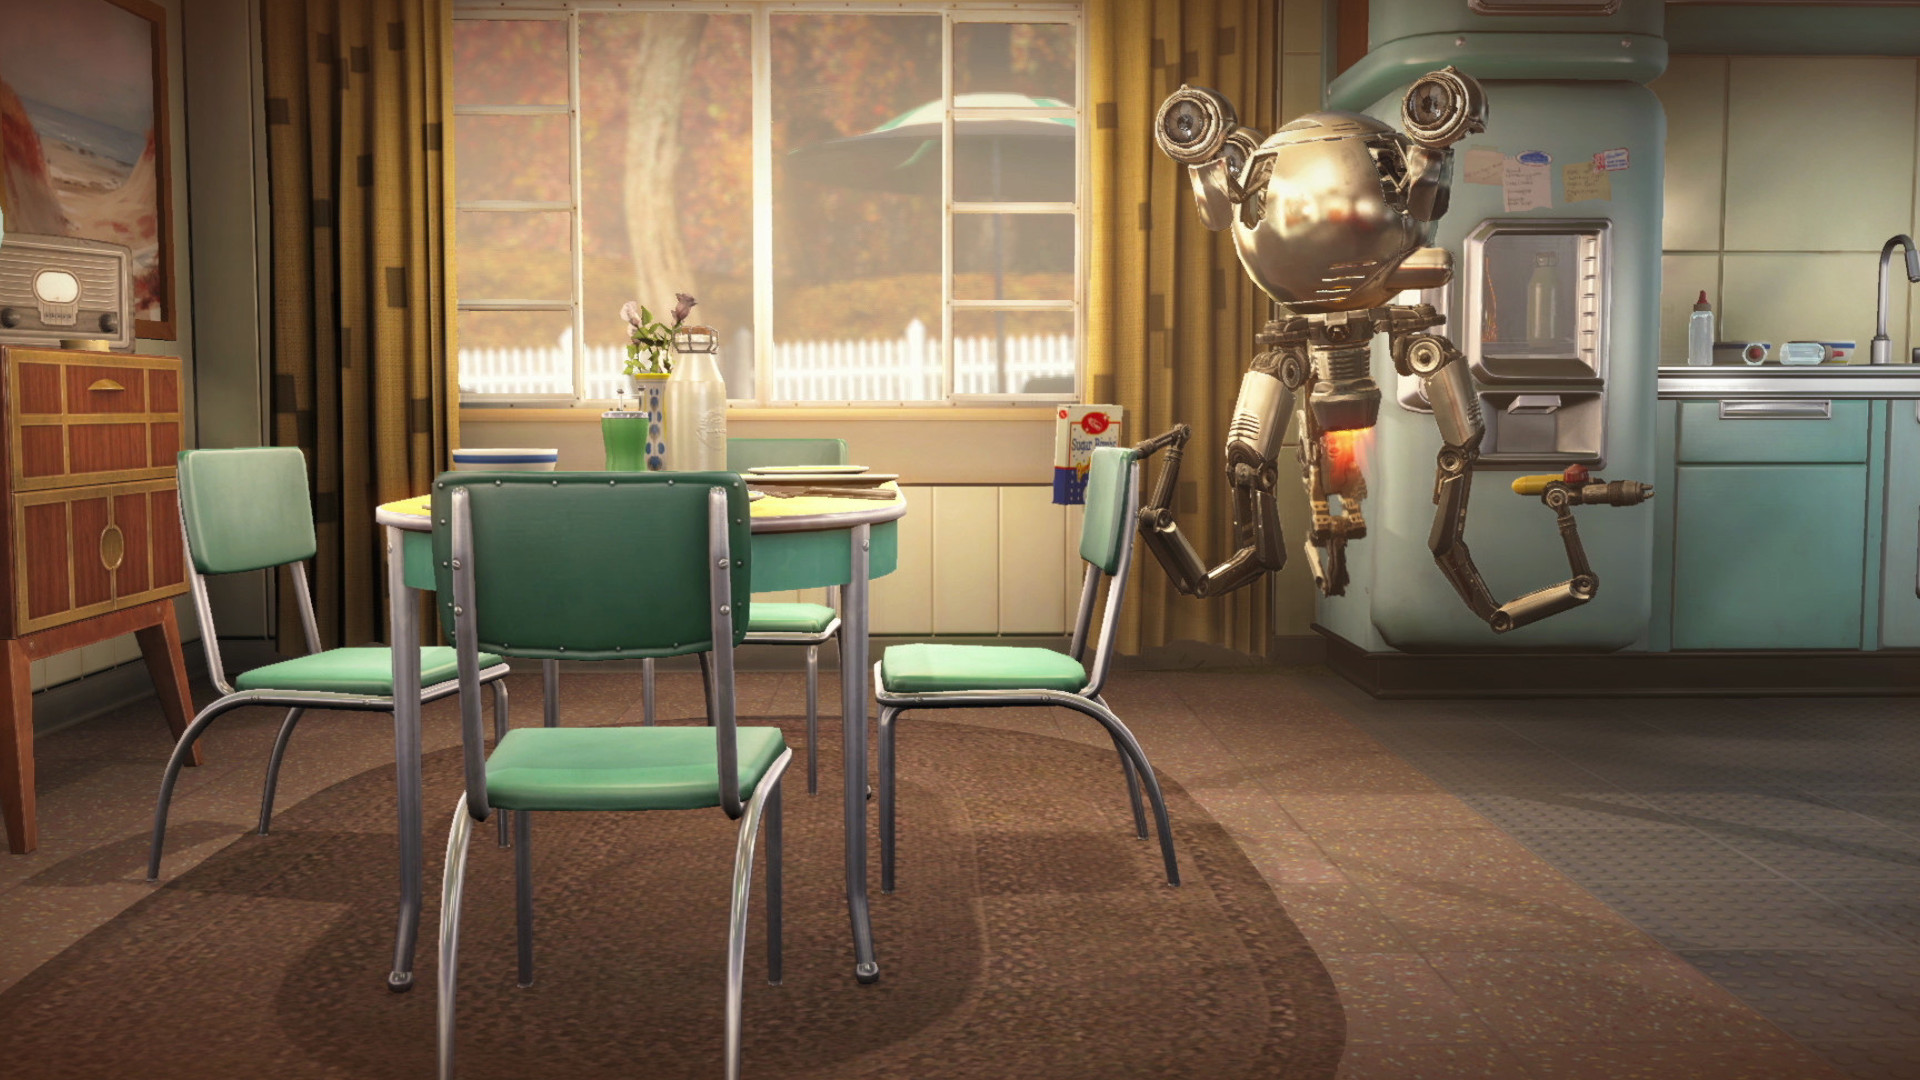 A Mr. Handy robot floating in a pre-war pastel-colored house in Fallout 4